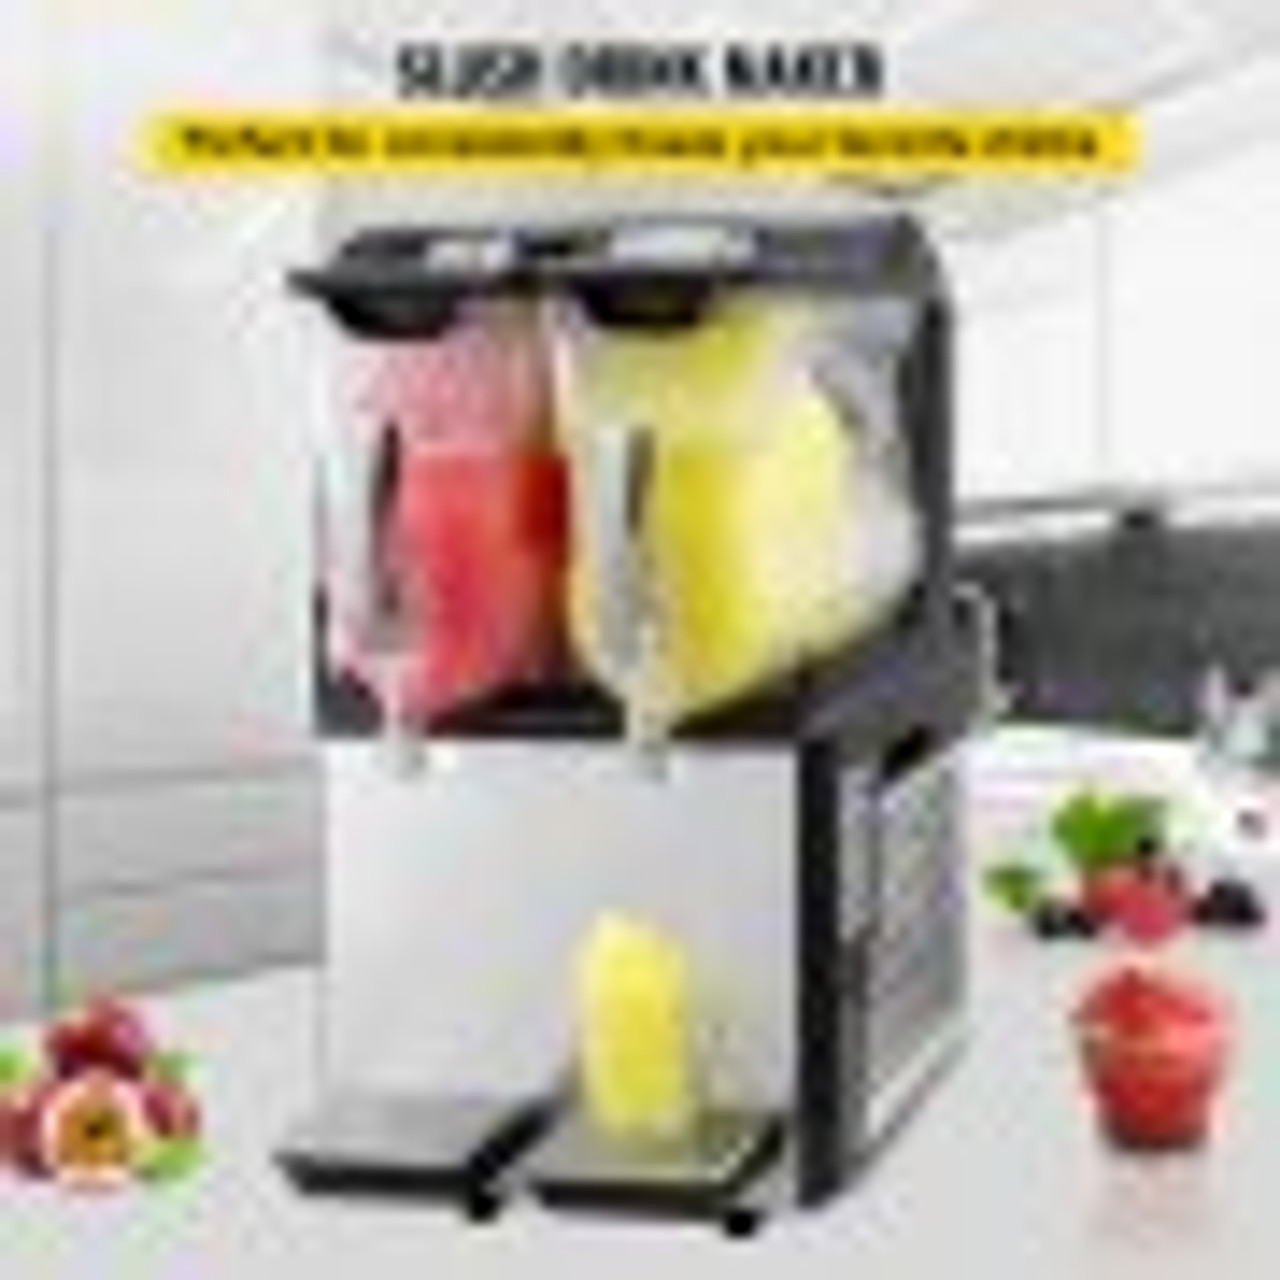 110V Slushy Machine 20L Double Bowl Margarita Frozen Drink Maker 900W Automatic Clean Day and Night Modes for Supermarkets Cafes Restaurants Snack Bars Commercial Use